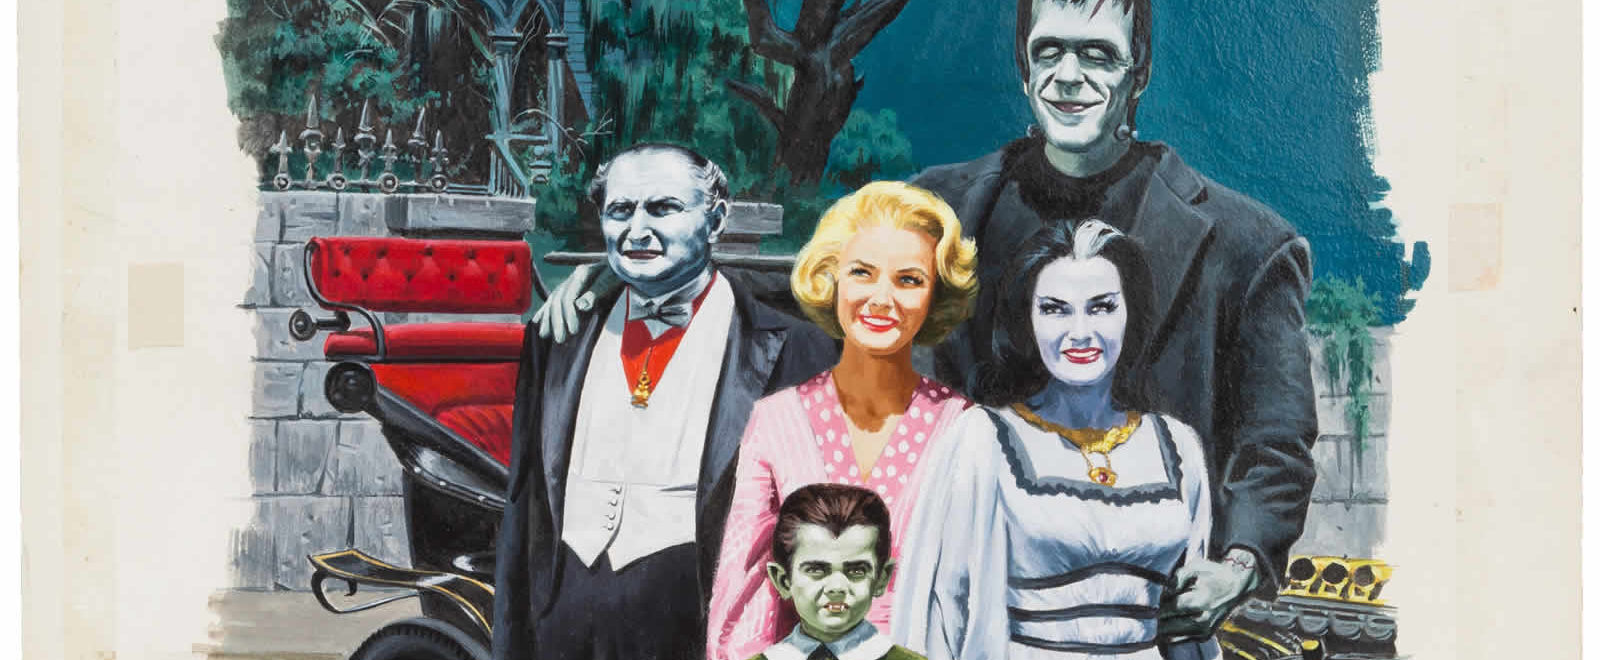 header - the munsters cast